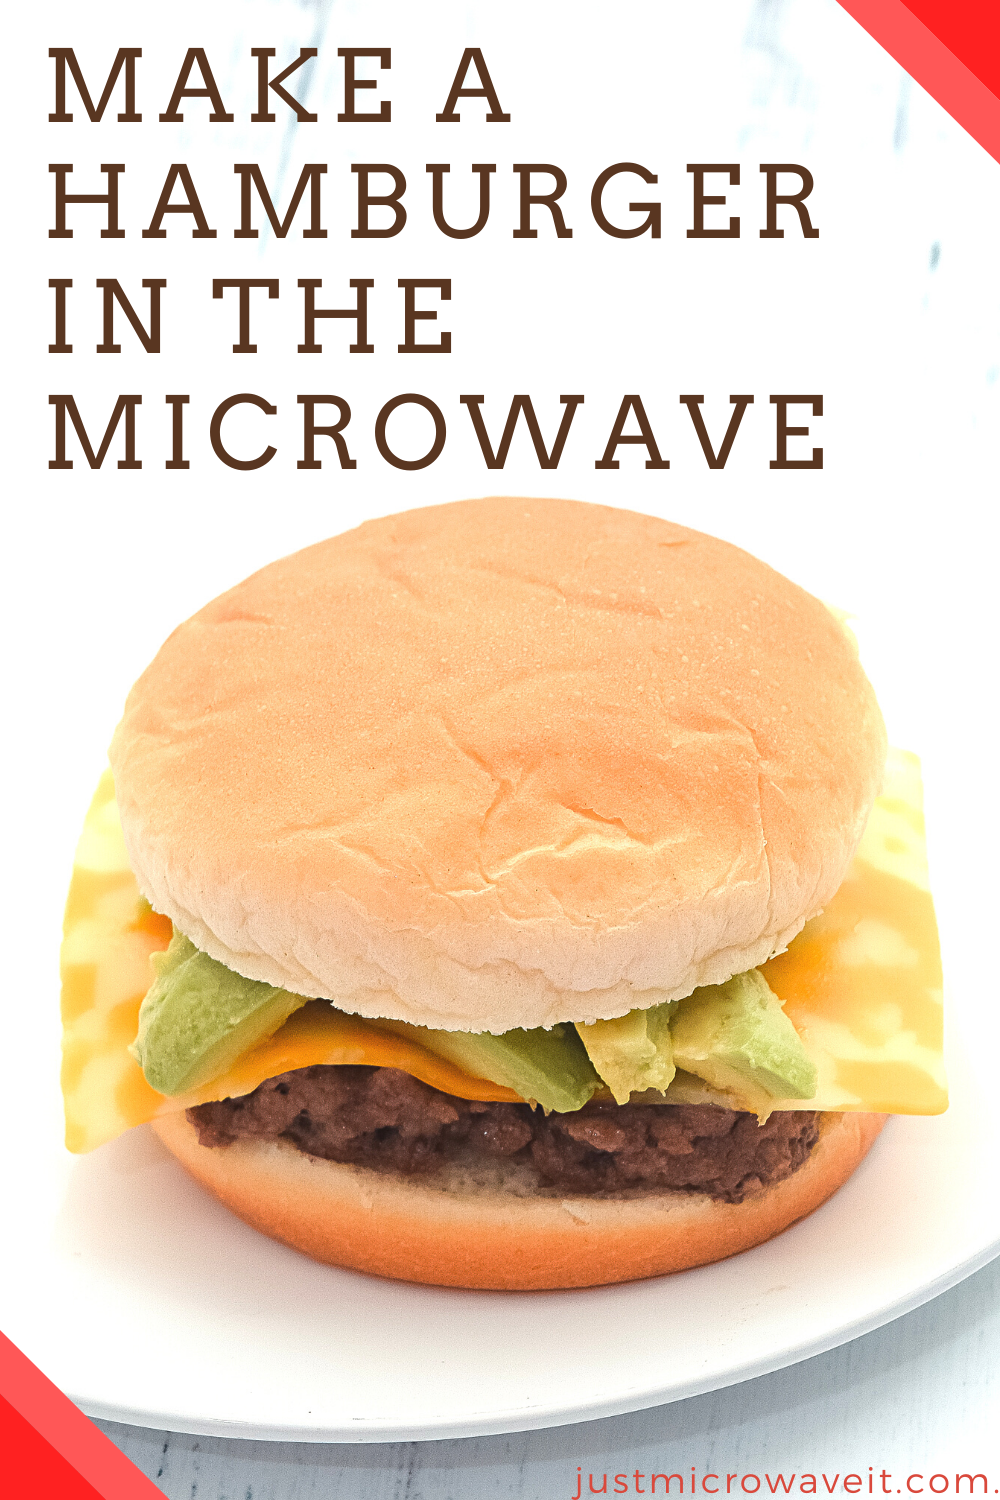 A close up view of a finished cheeseburger that was cooked in the microwave.